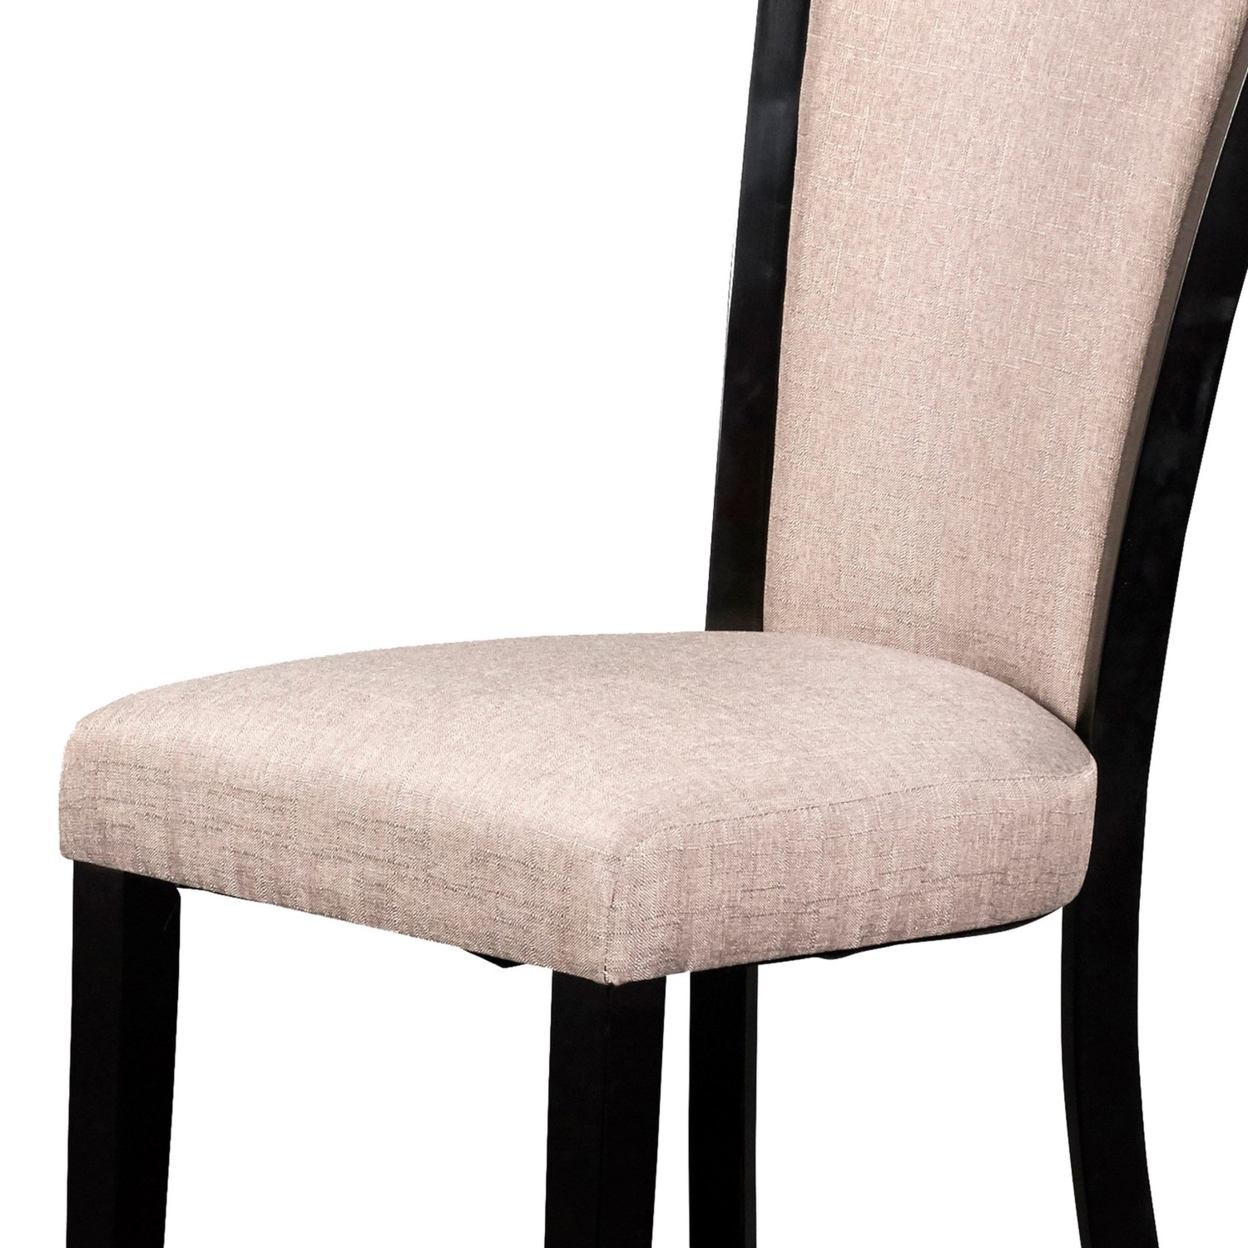 Wooden Dining Chair With Fabric Seat And Backrest, Set Of 2,Black And Beige- Saltoro Sherpi